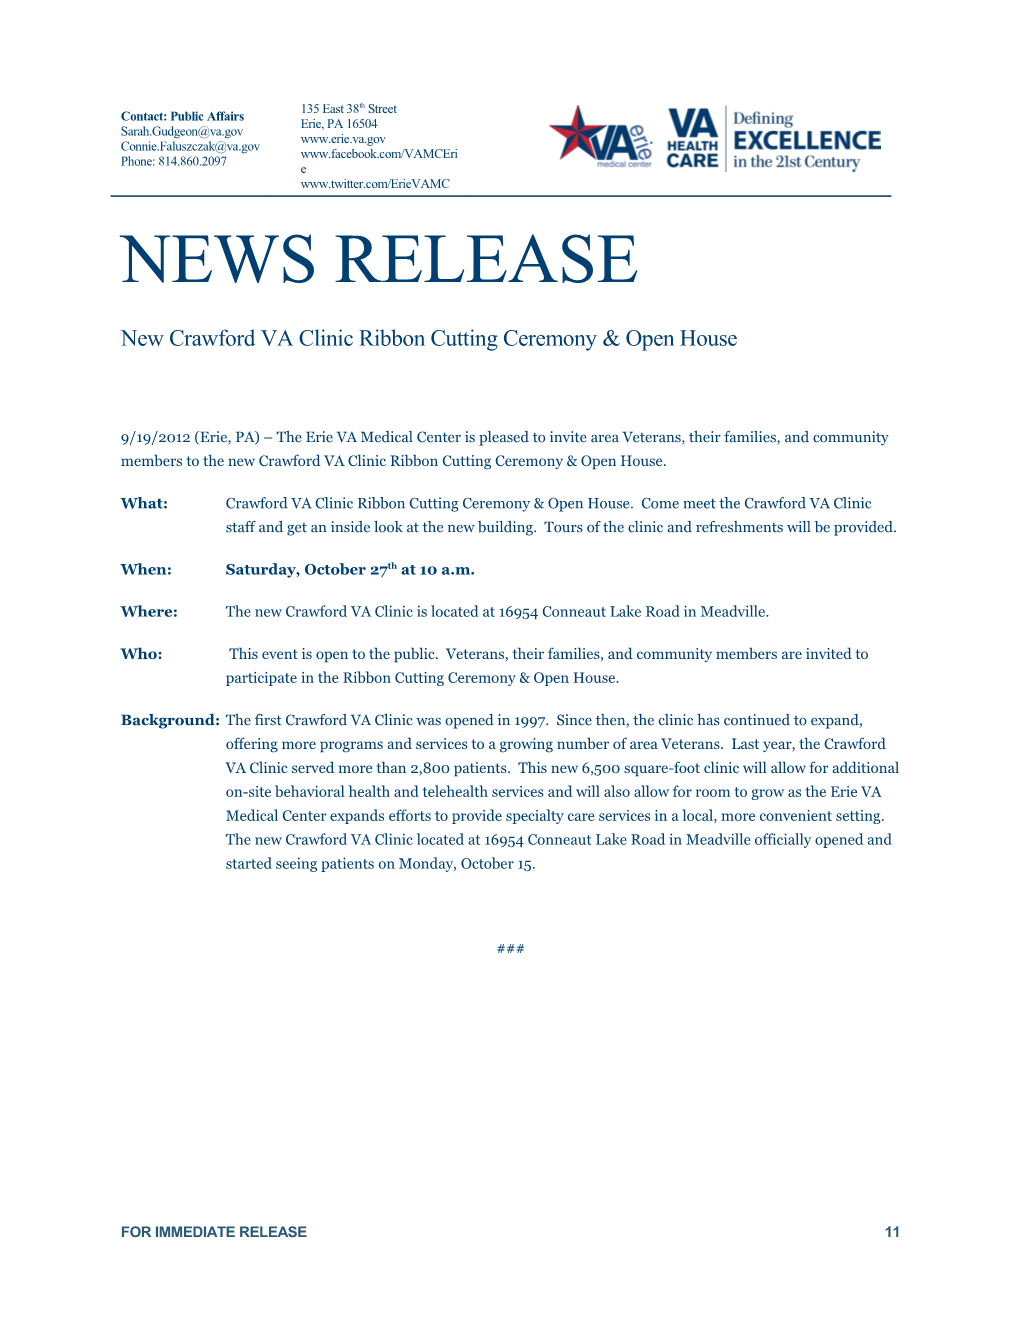 New Crawford VA Clinic Ribbon Cutting Ceremony & Open House